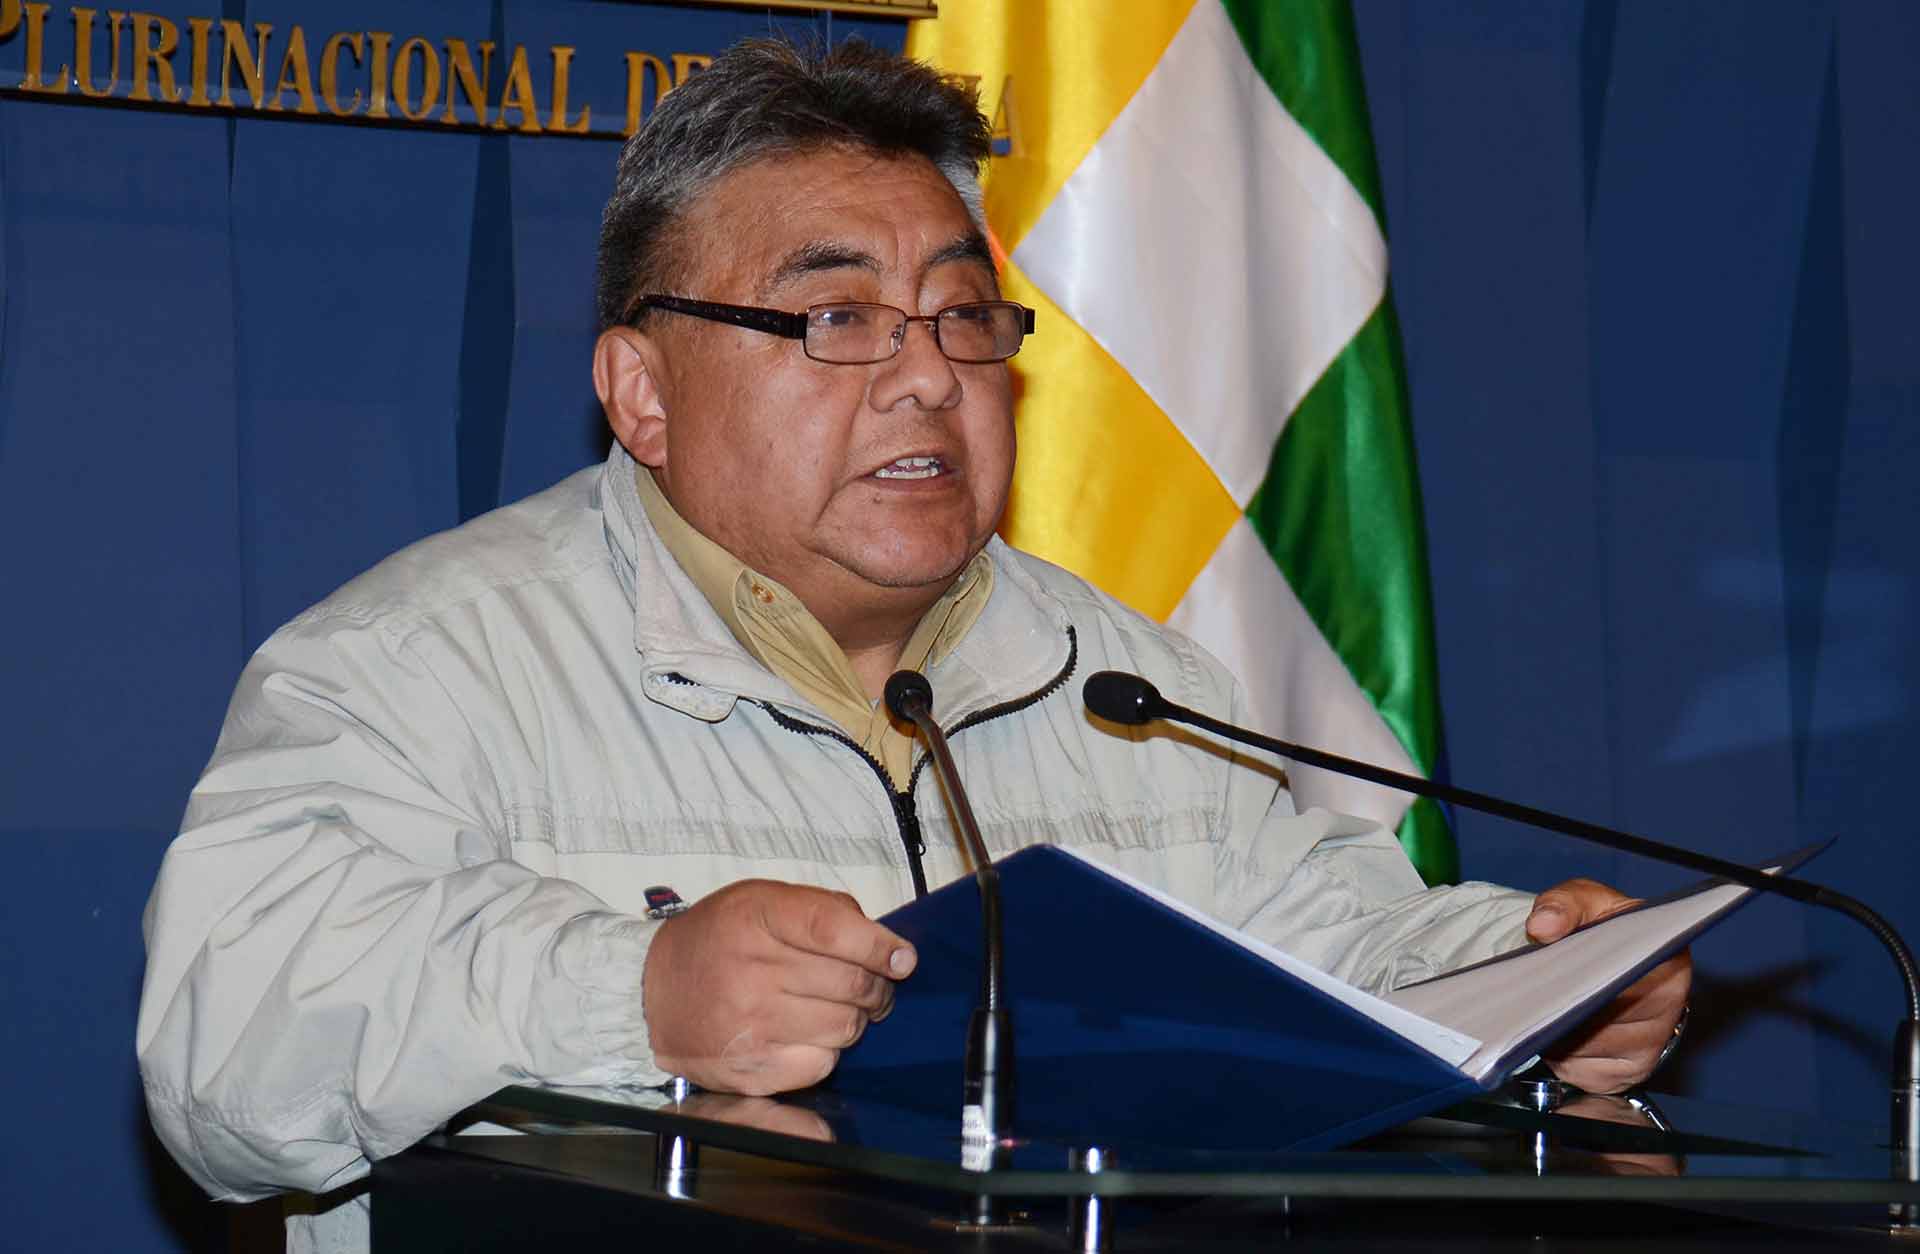 In this Nov. 26, 2014 photo, released by the government-run Bolivian Information Agency, Bolivia's Deputy Minister of Internal Affairs Rodolfo Illanes speaks during a press conference at the government palace in La Paz, Bolivia. Government officials said that the striking miners kidnapped and beat Illanes to death after he traveled to the area to mediate in the bitter conflict over mining laws. (Gonzalo Jallasi/Bolivian Information Agency via AP)